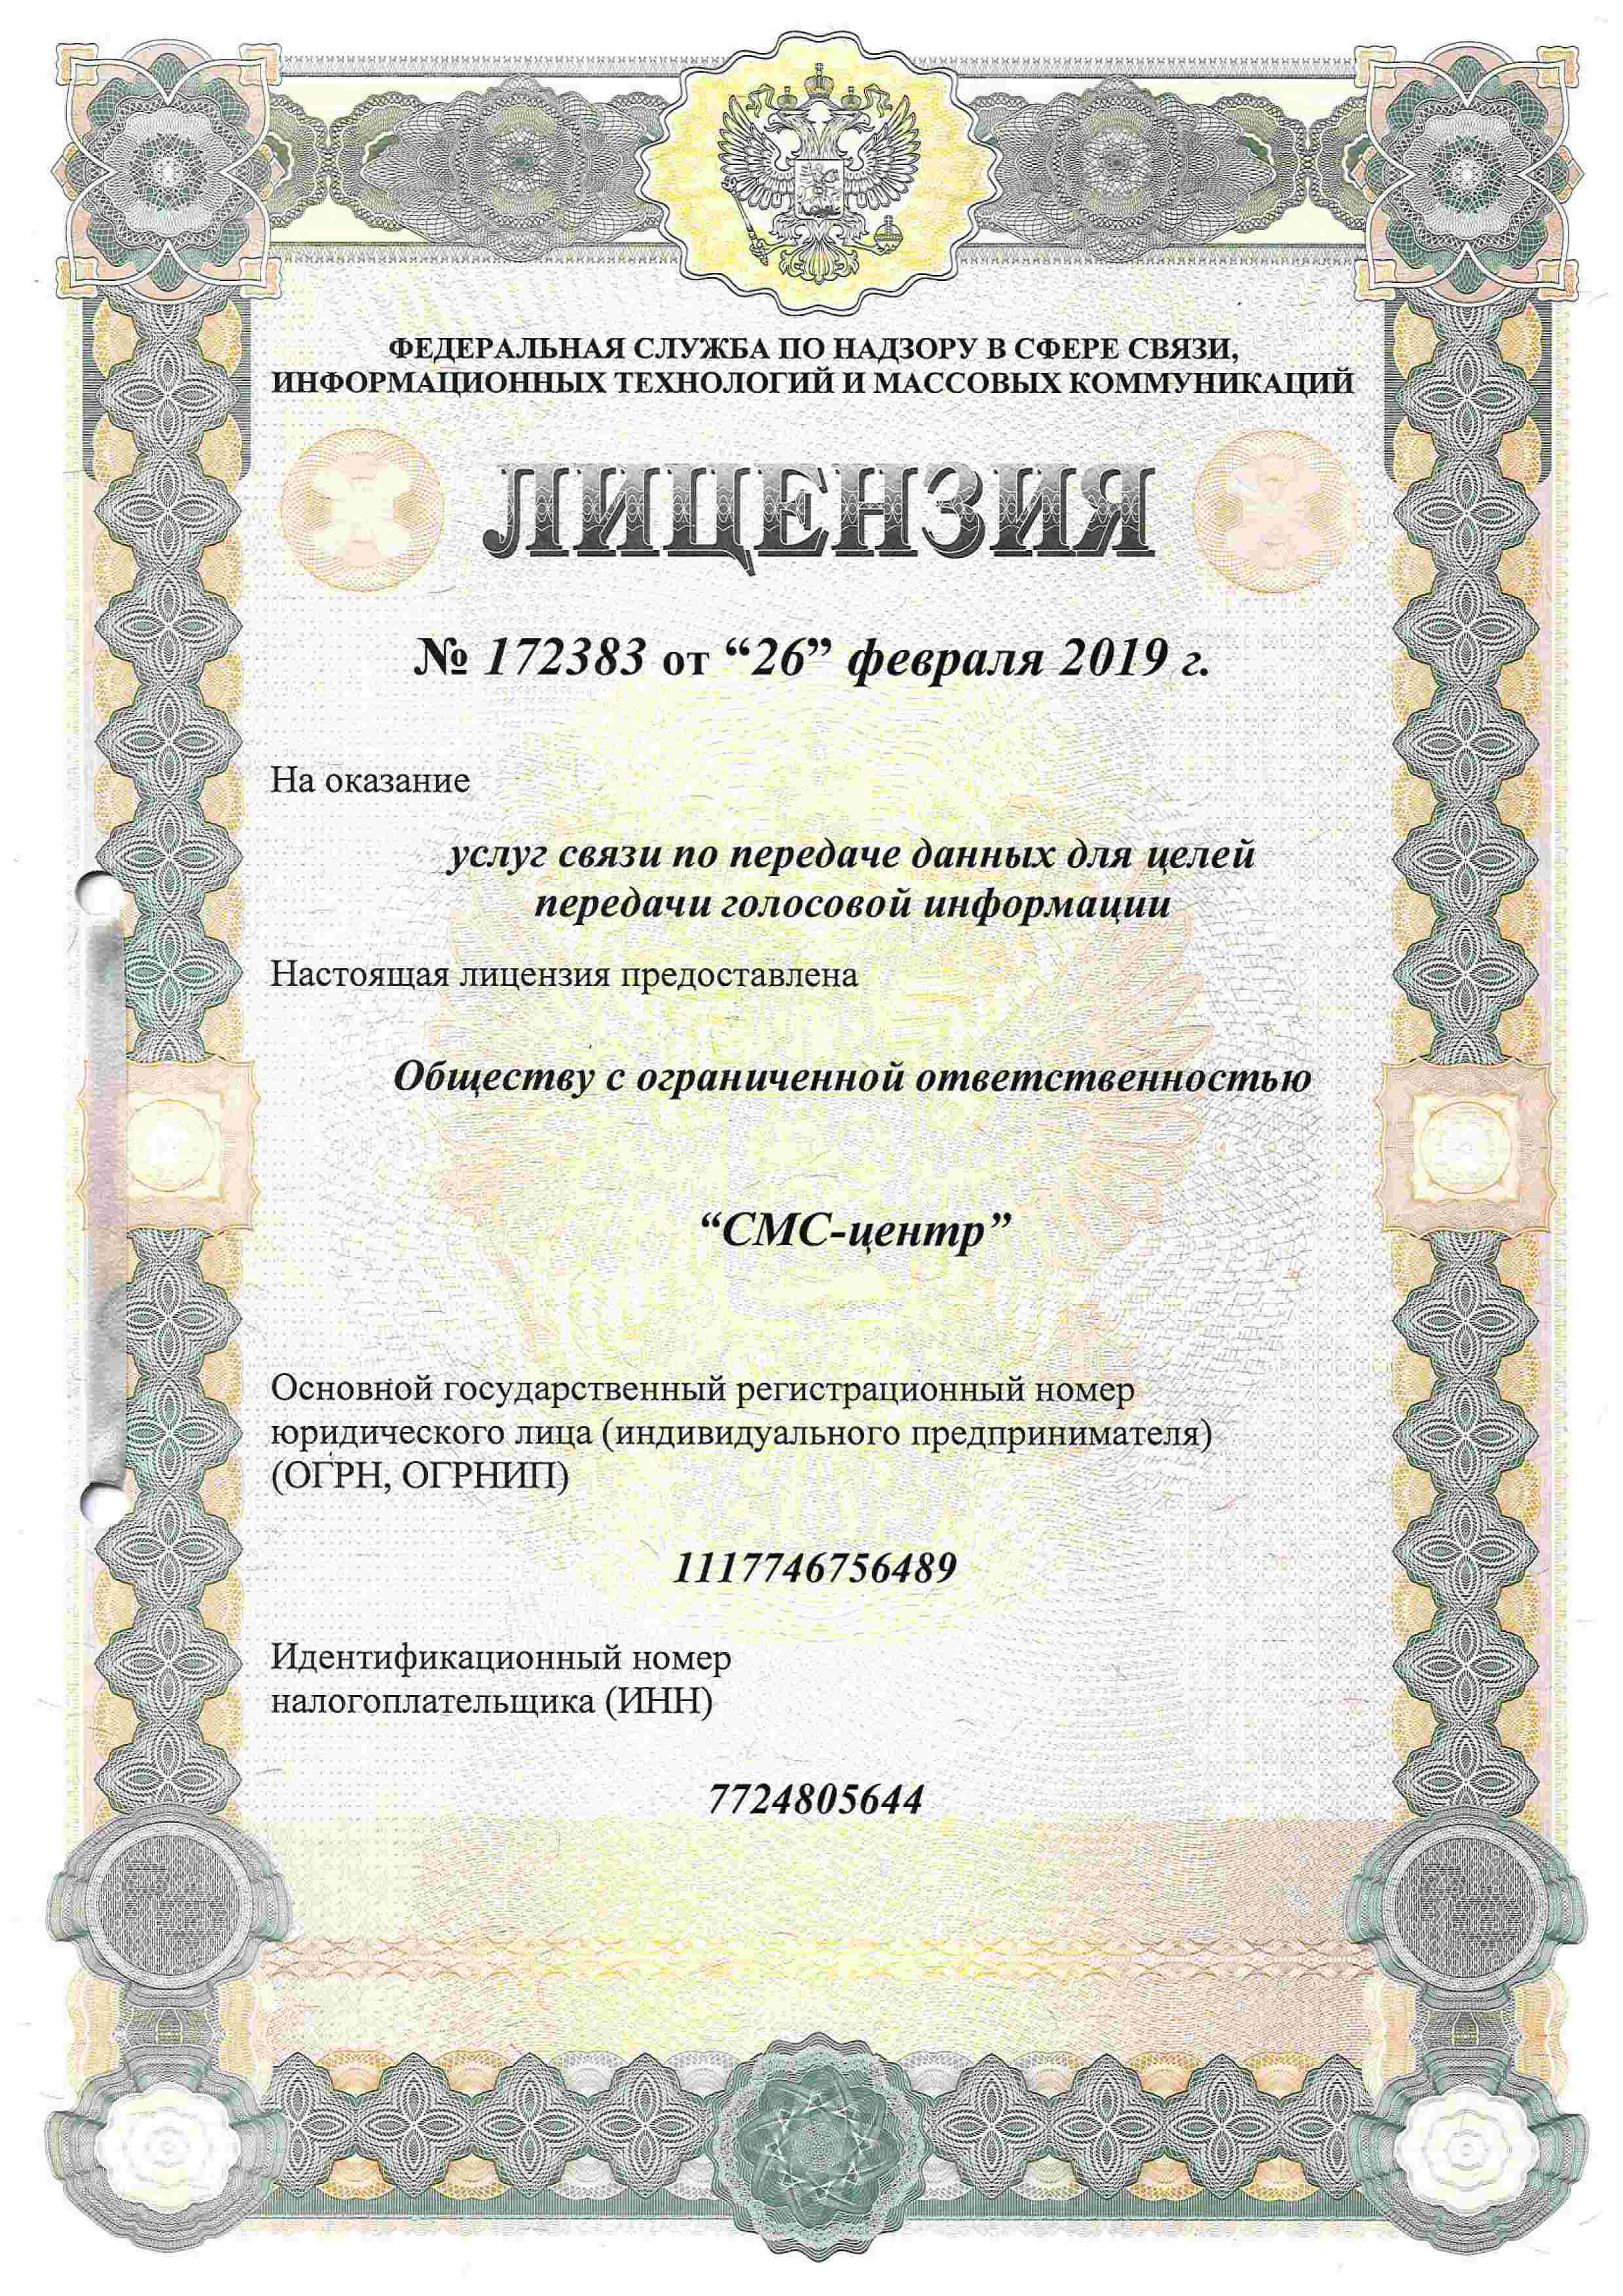 License for the provision of communication services for the transmission of voice information LLC SMS-center (Moscow)